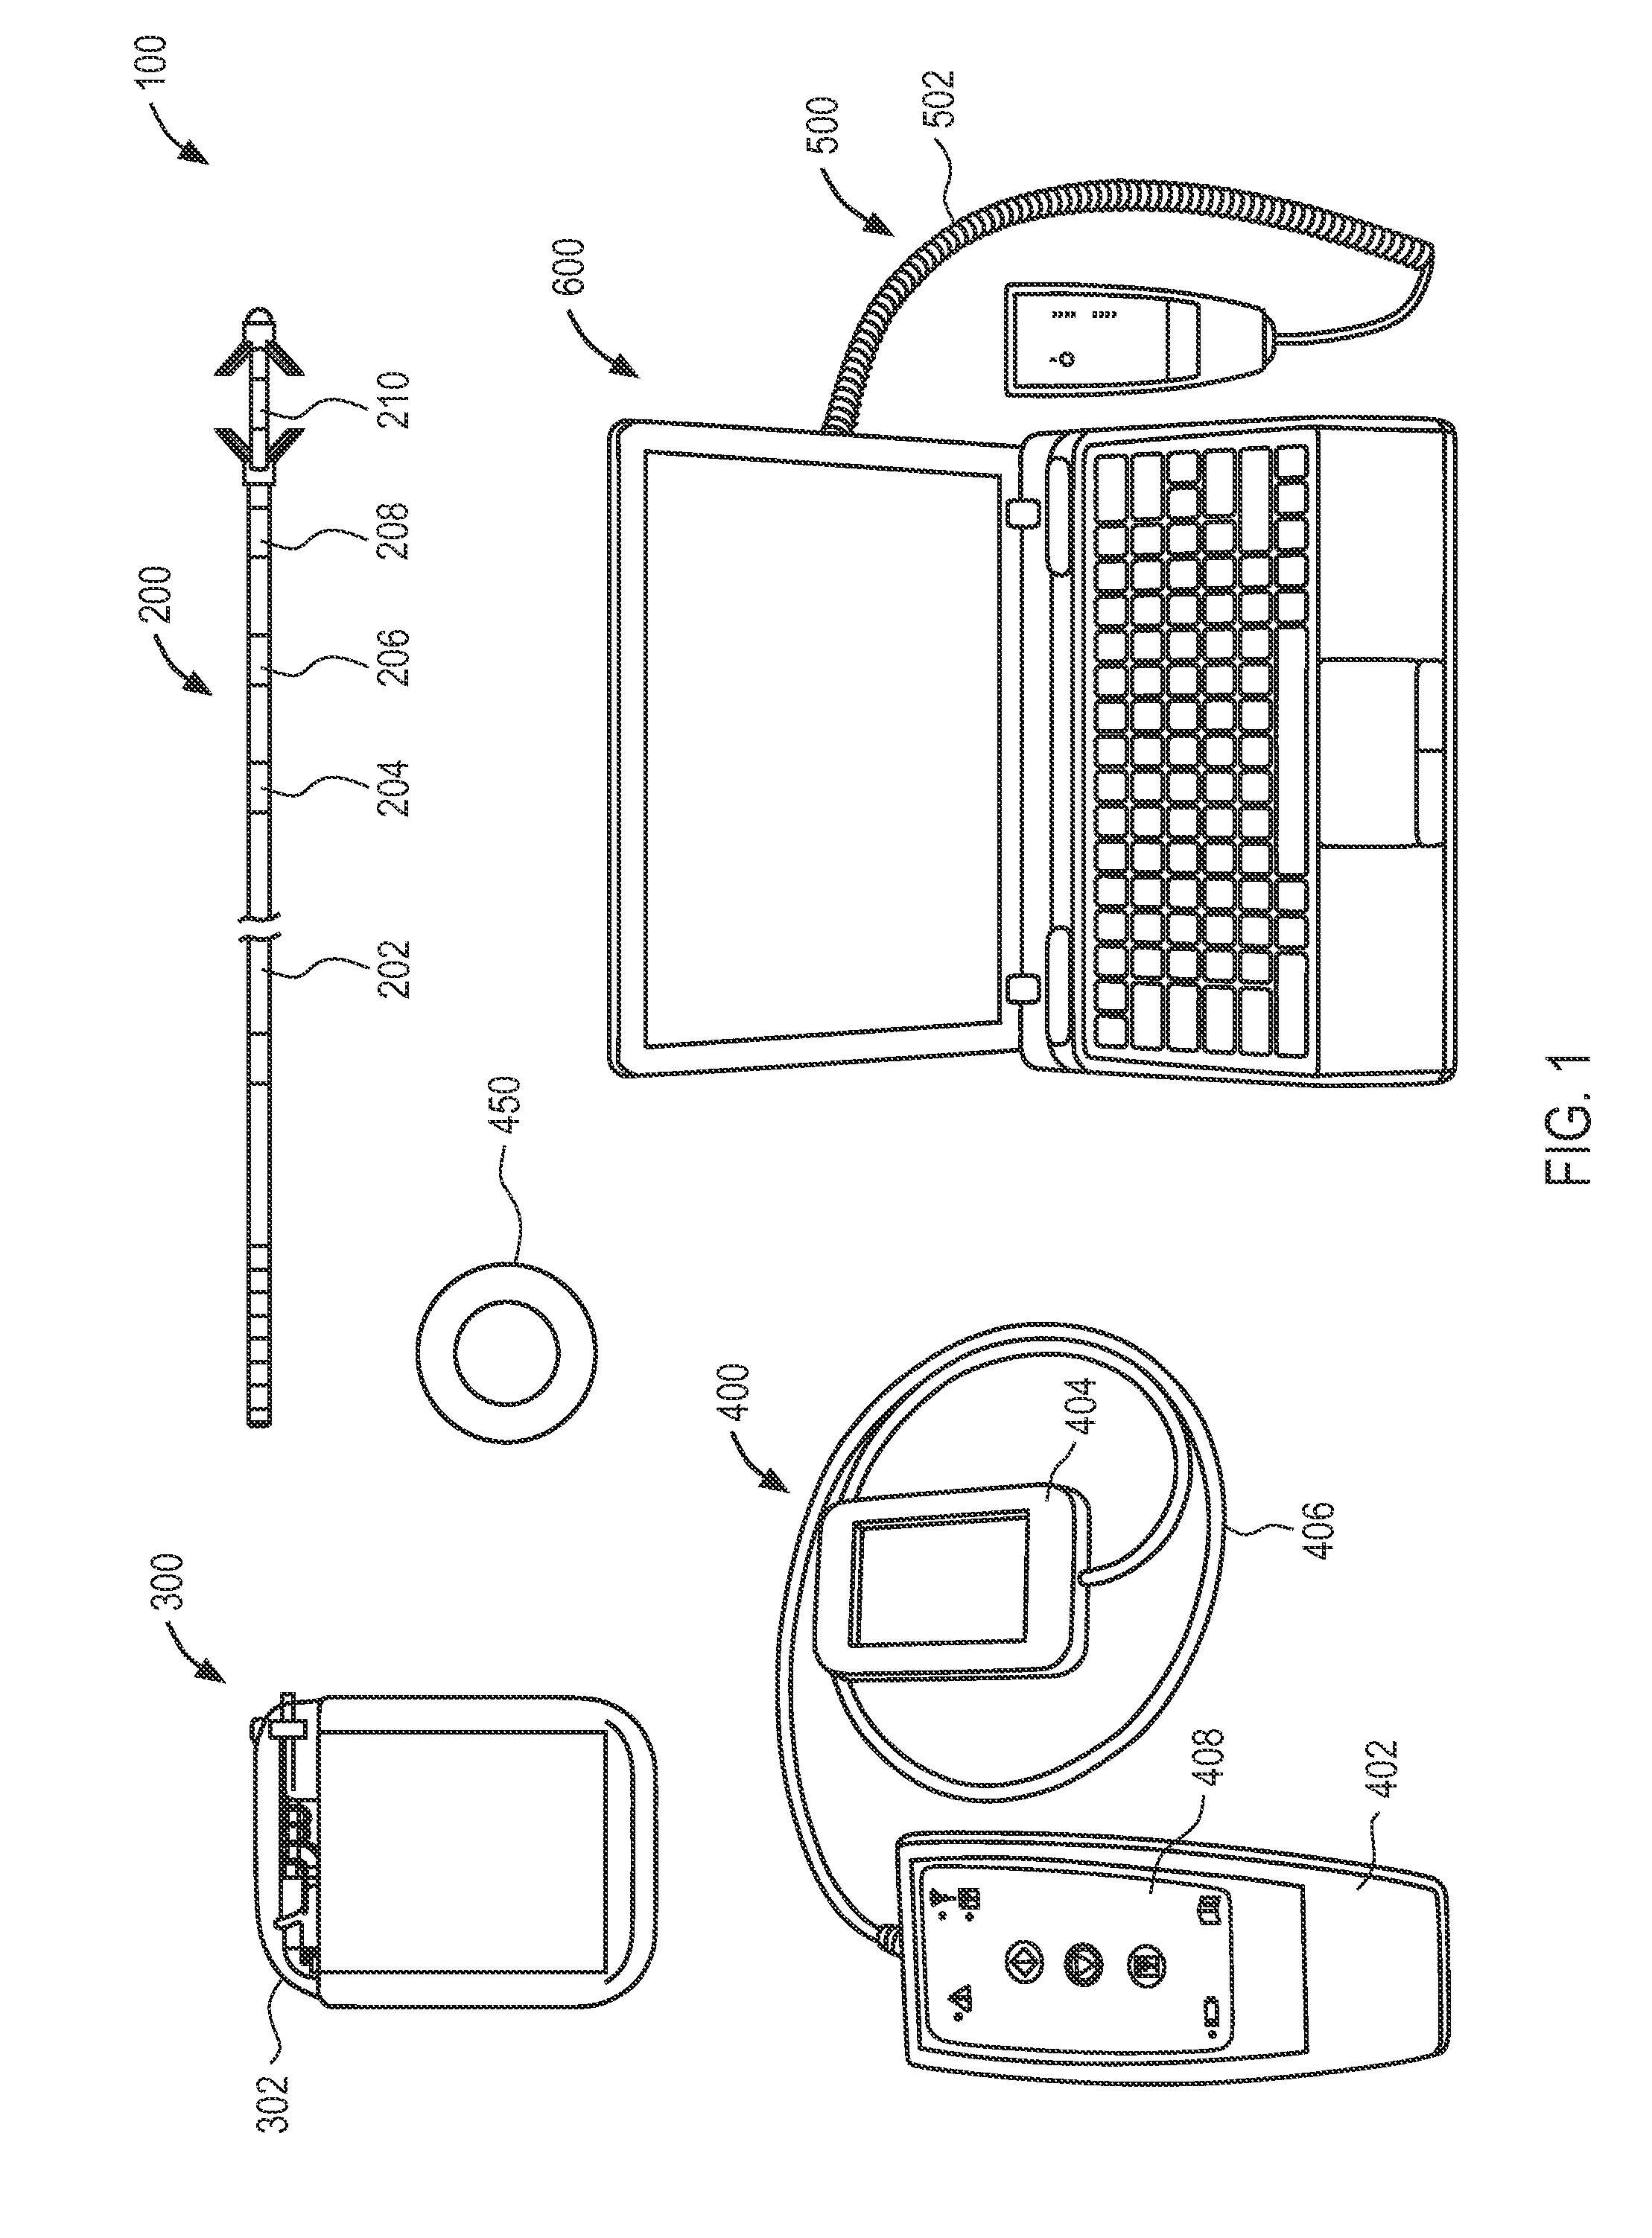 Systems and methods for implanting electrode leads for use with implantable neuromuscular electrical stimulator